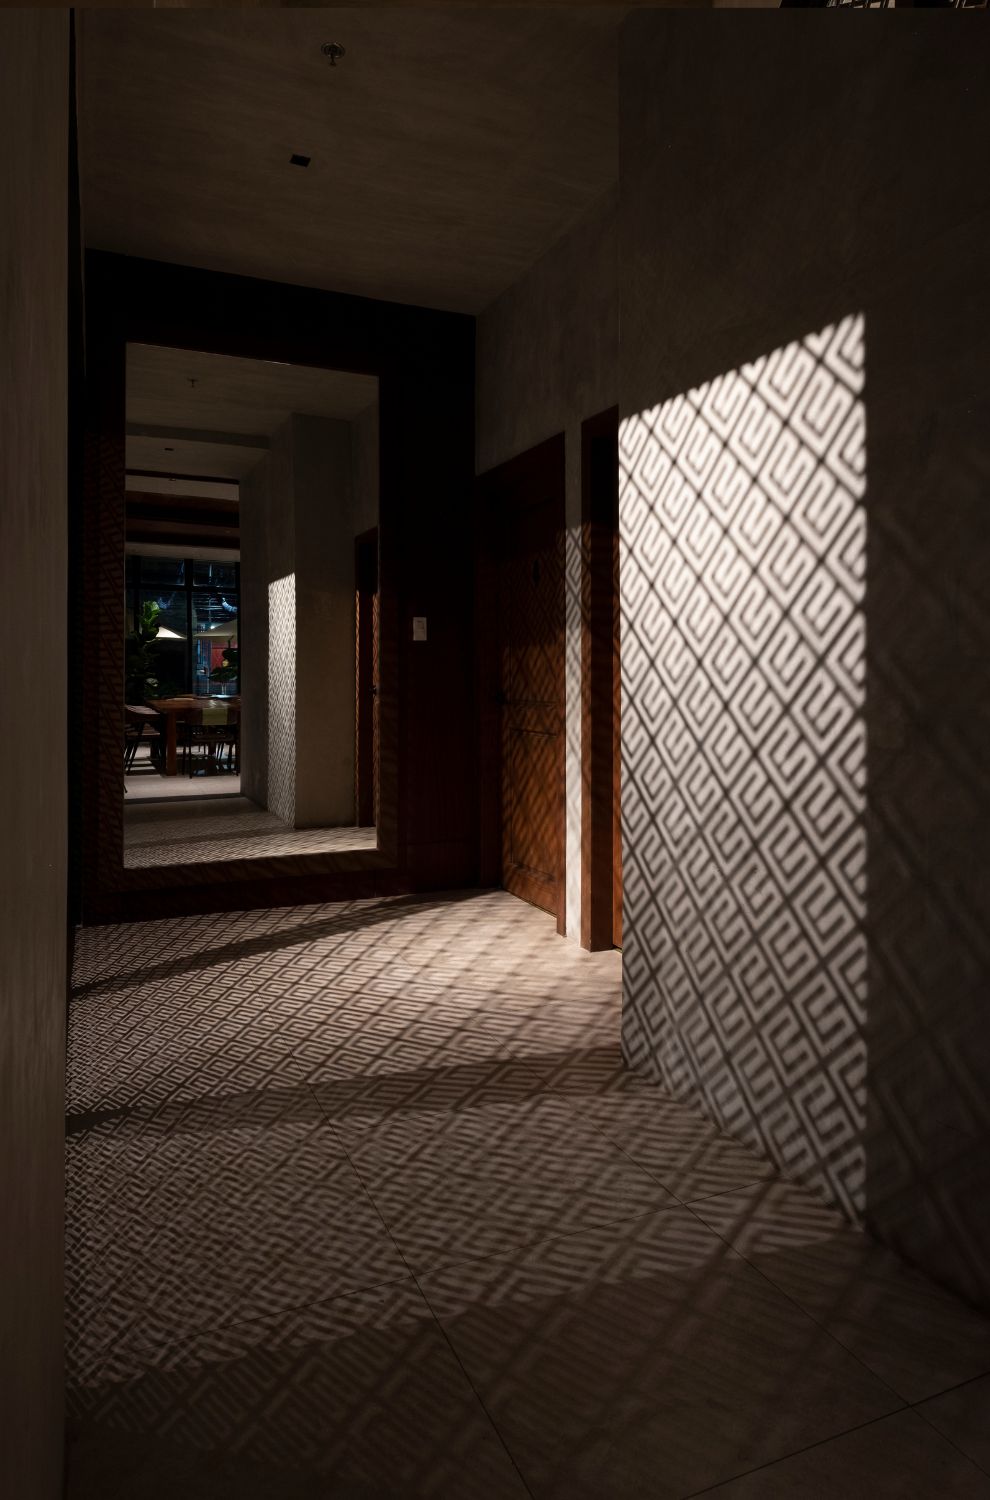 light filters through laser cut panels to create a pattern on the walls and floor at Cafe Bobs.